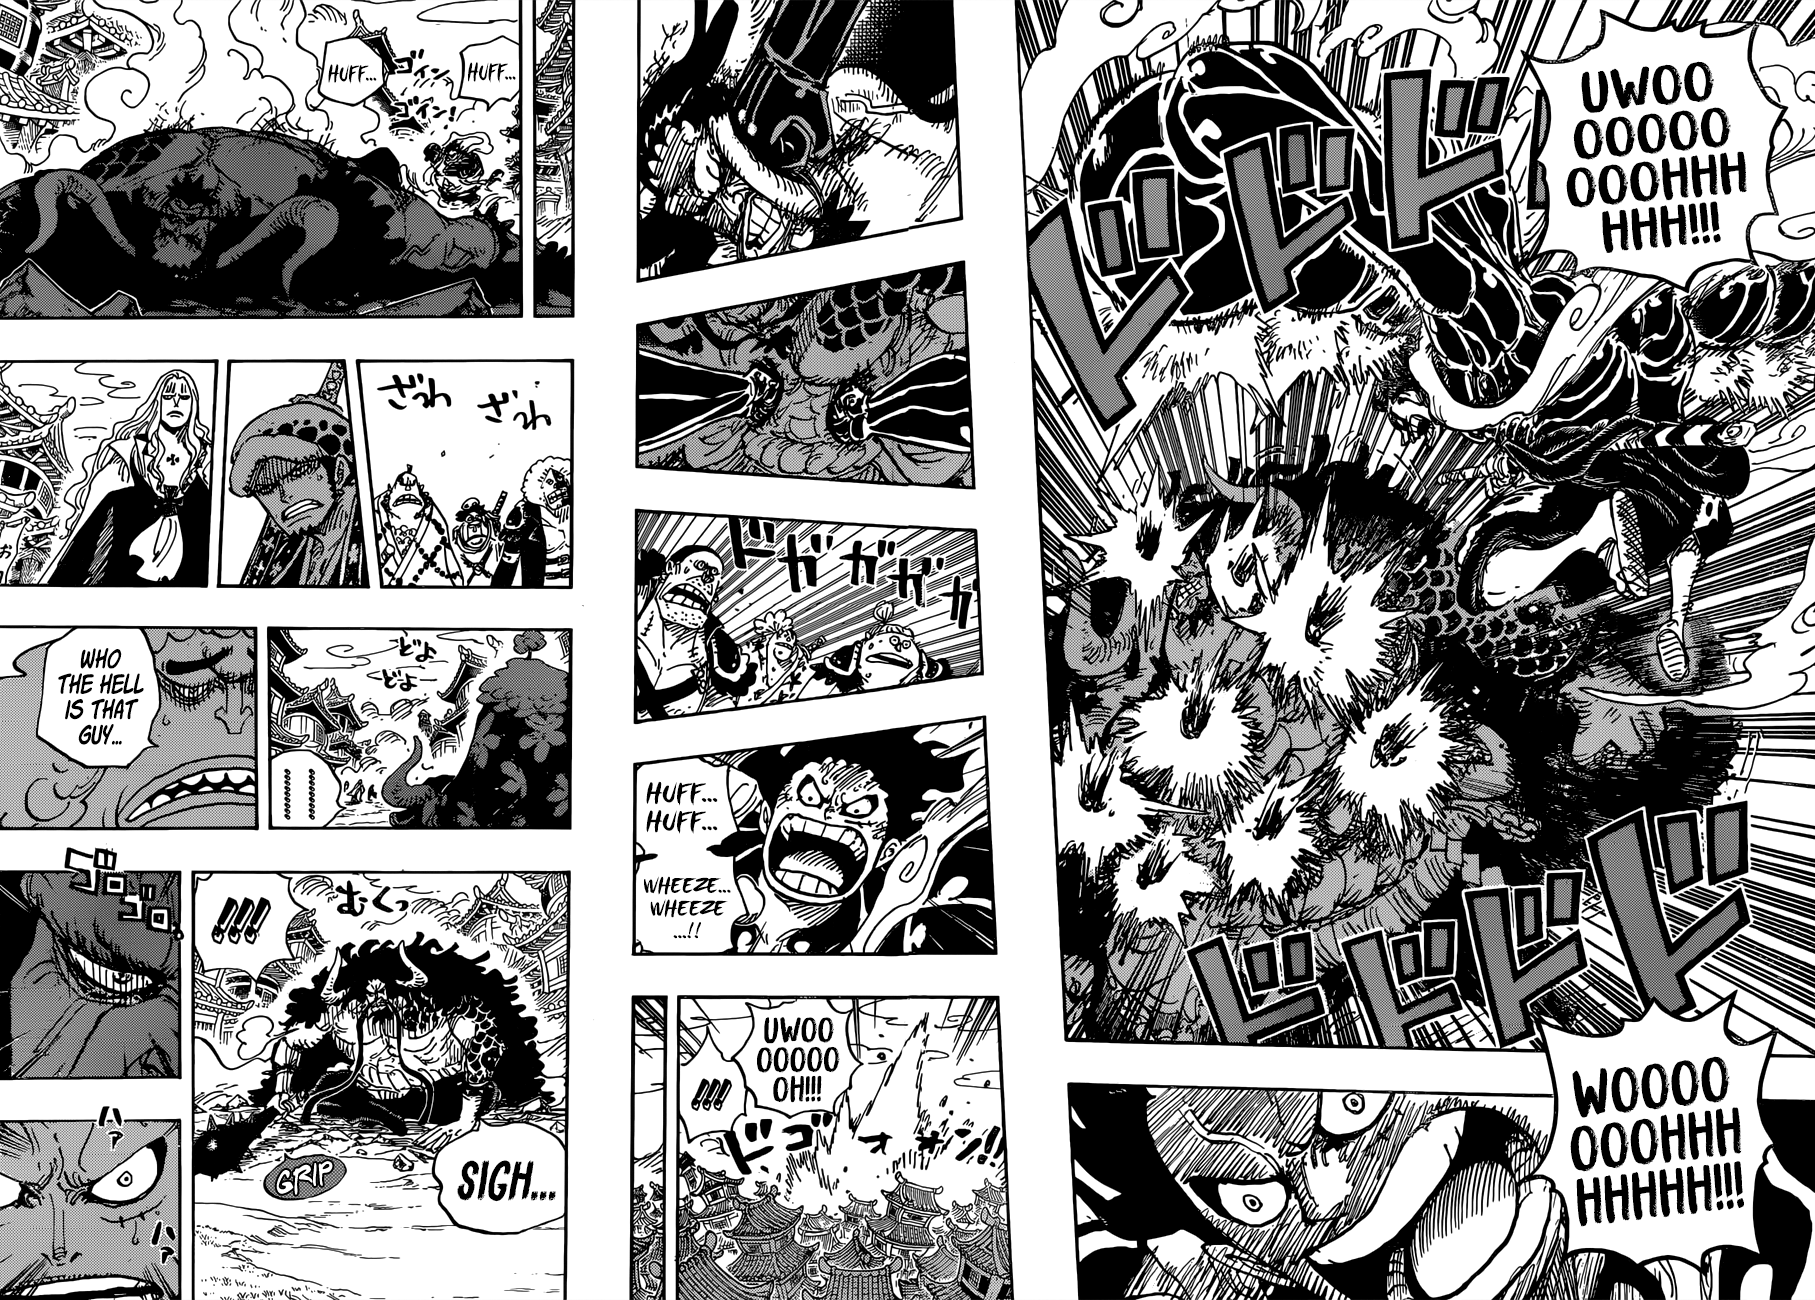 One Piece, Chapter 923 - Emperor Kaidou VS. Luffy image 13